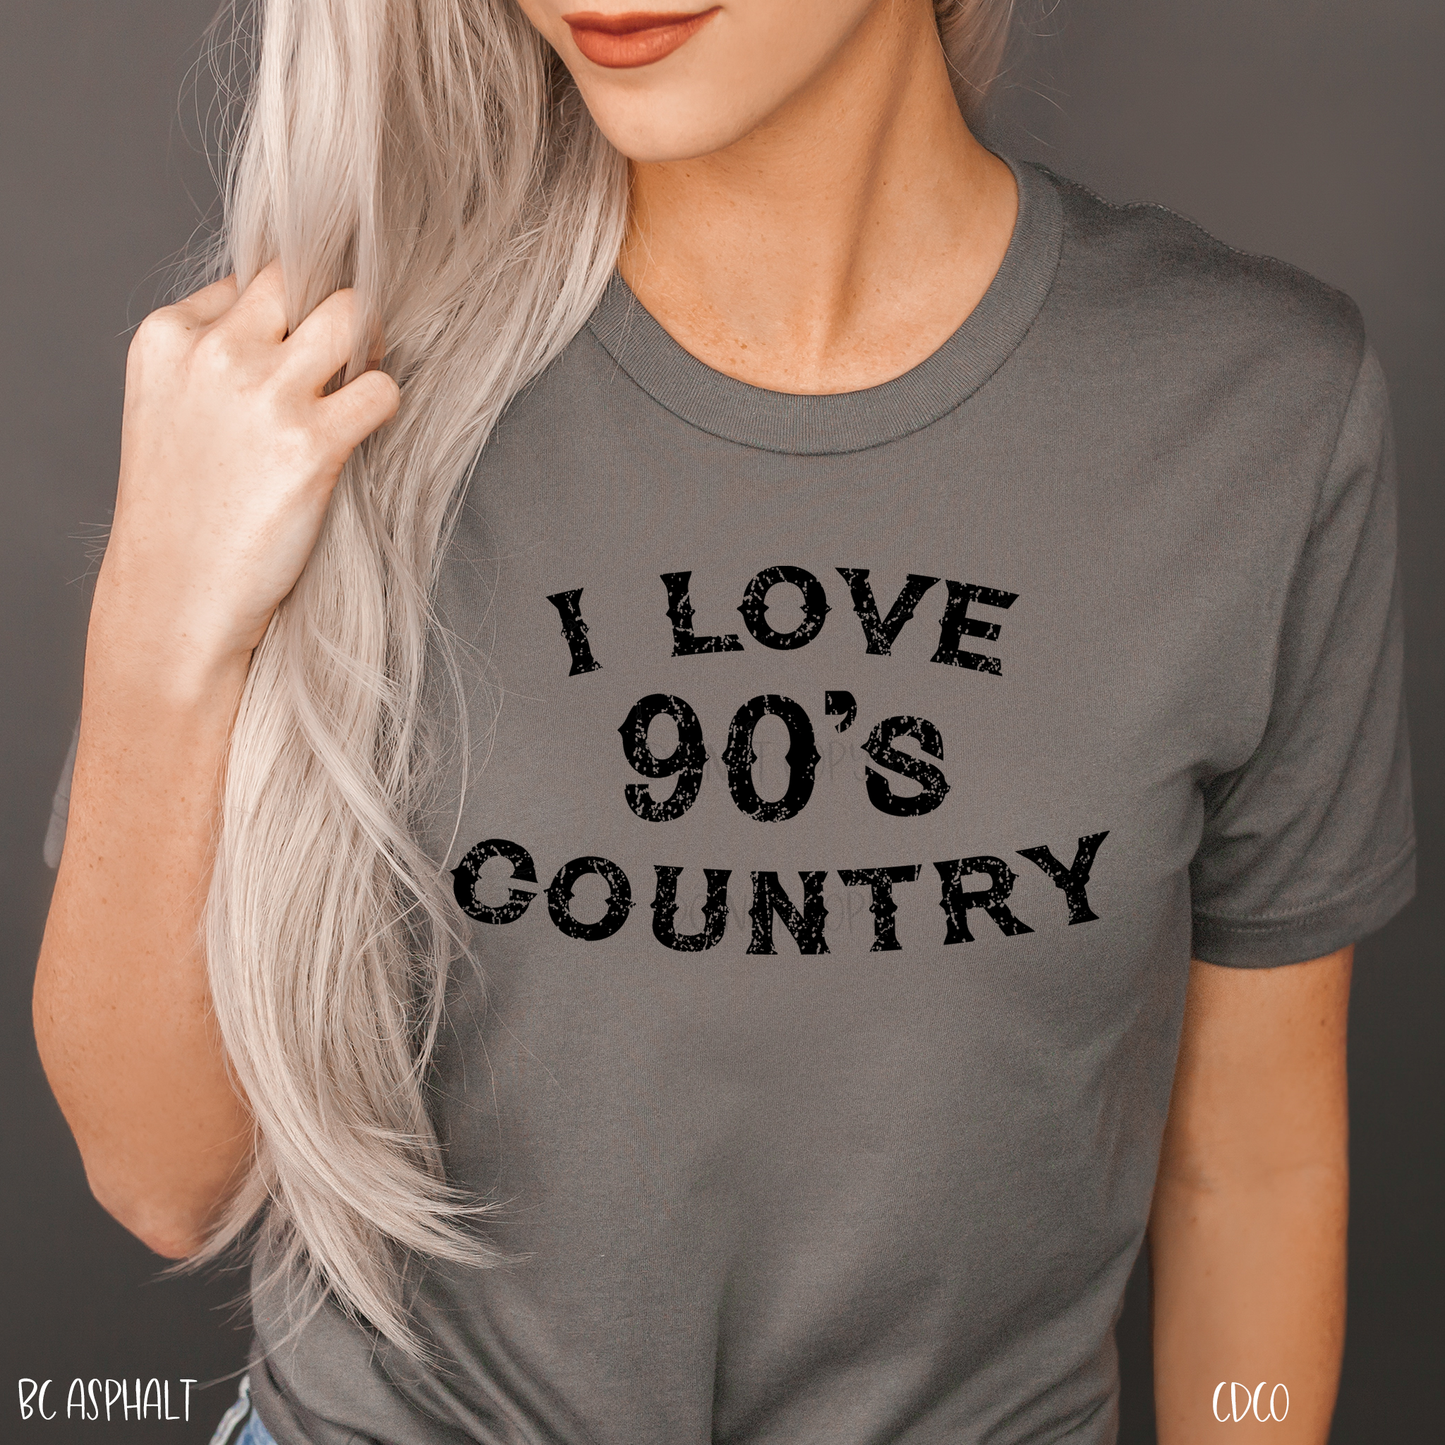 I Love 90's Country (325°)